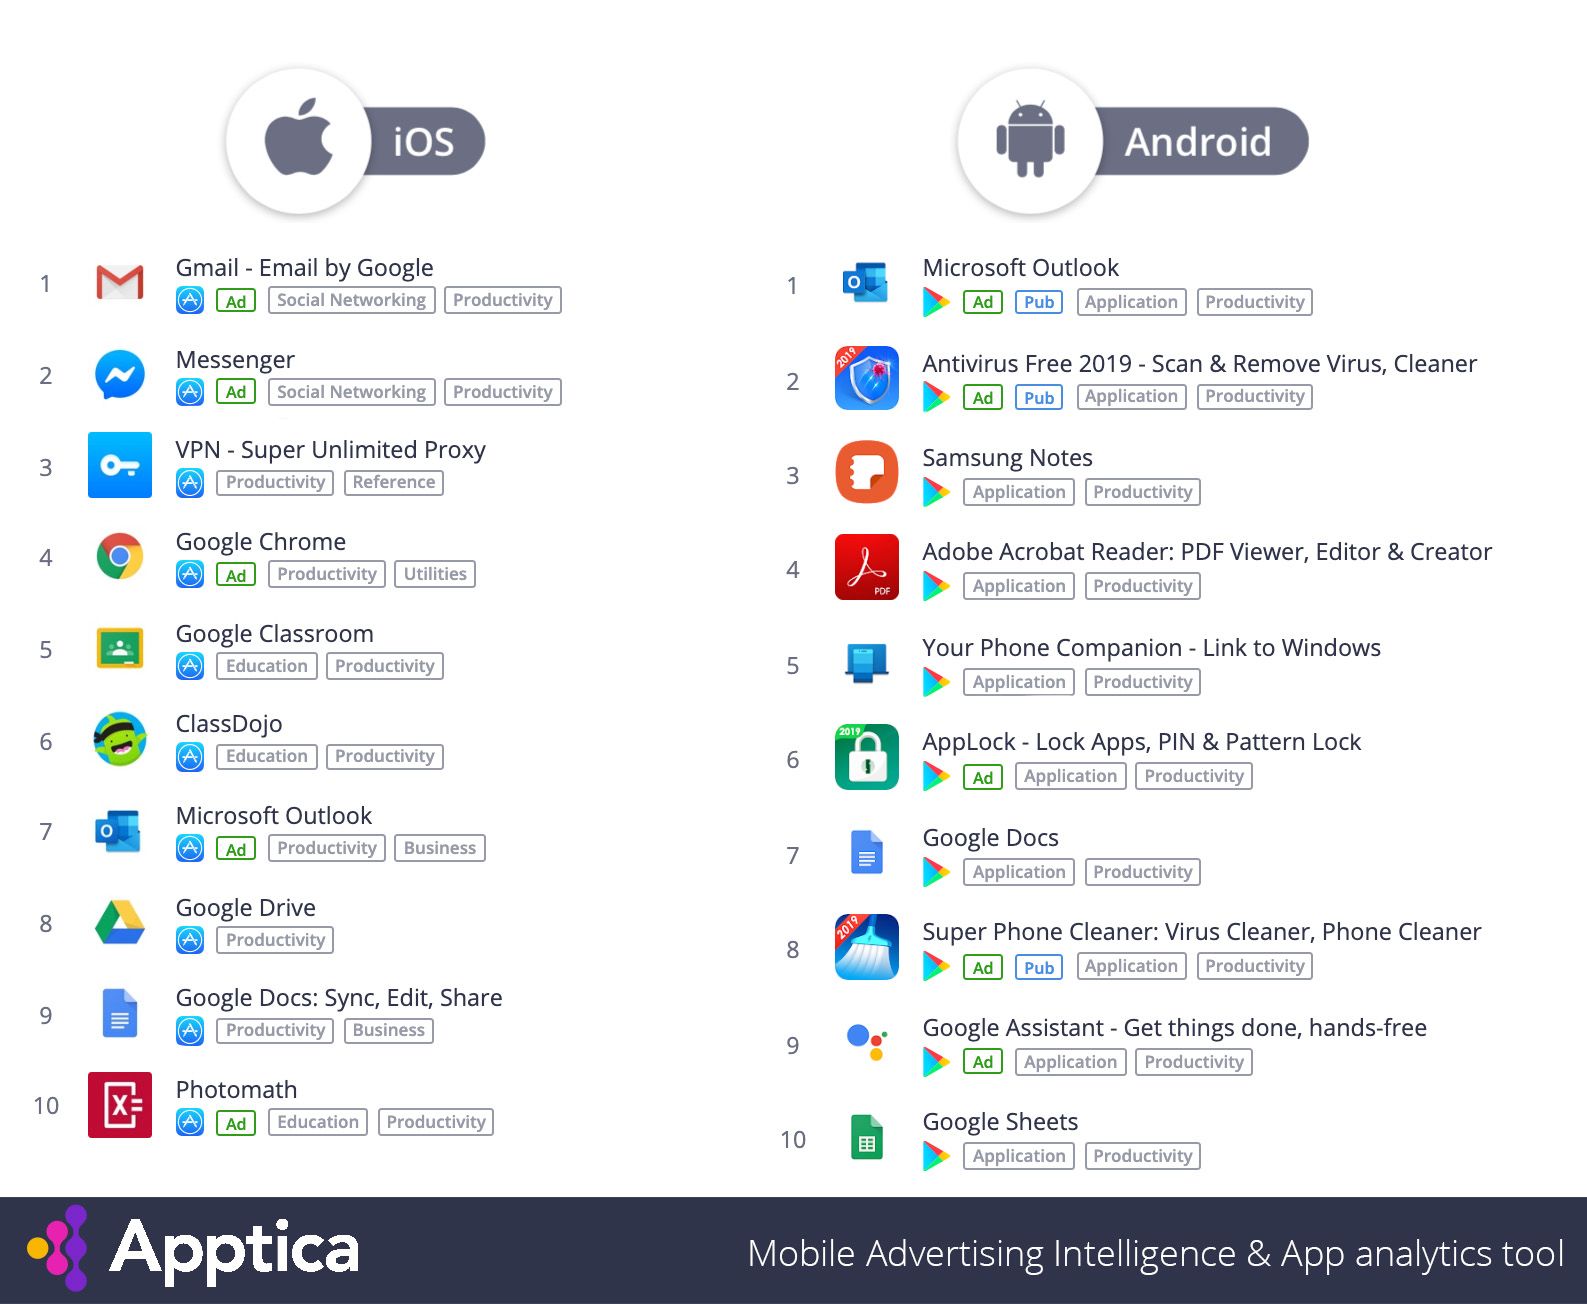 Top Apps in category 'Productivity' by downloads in the US, August 2019